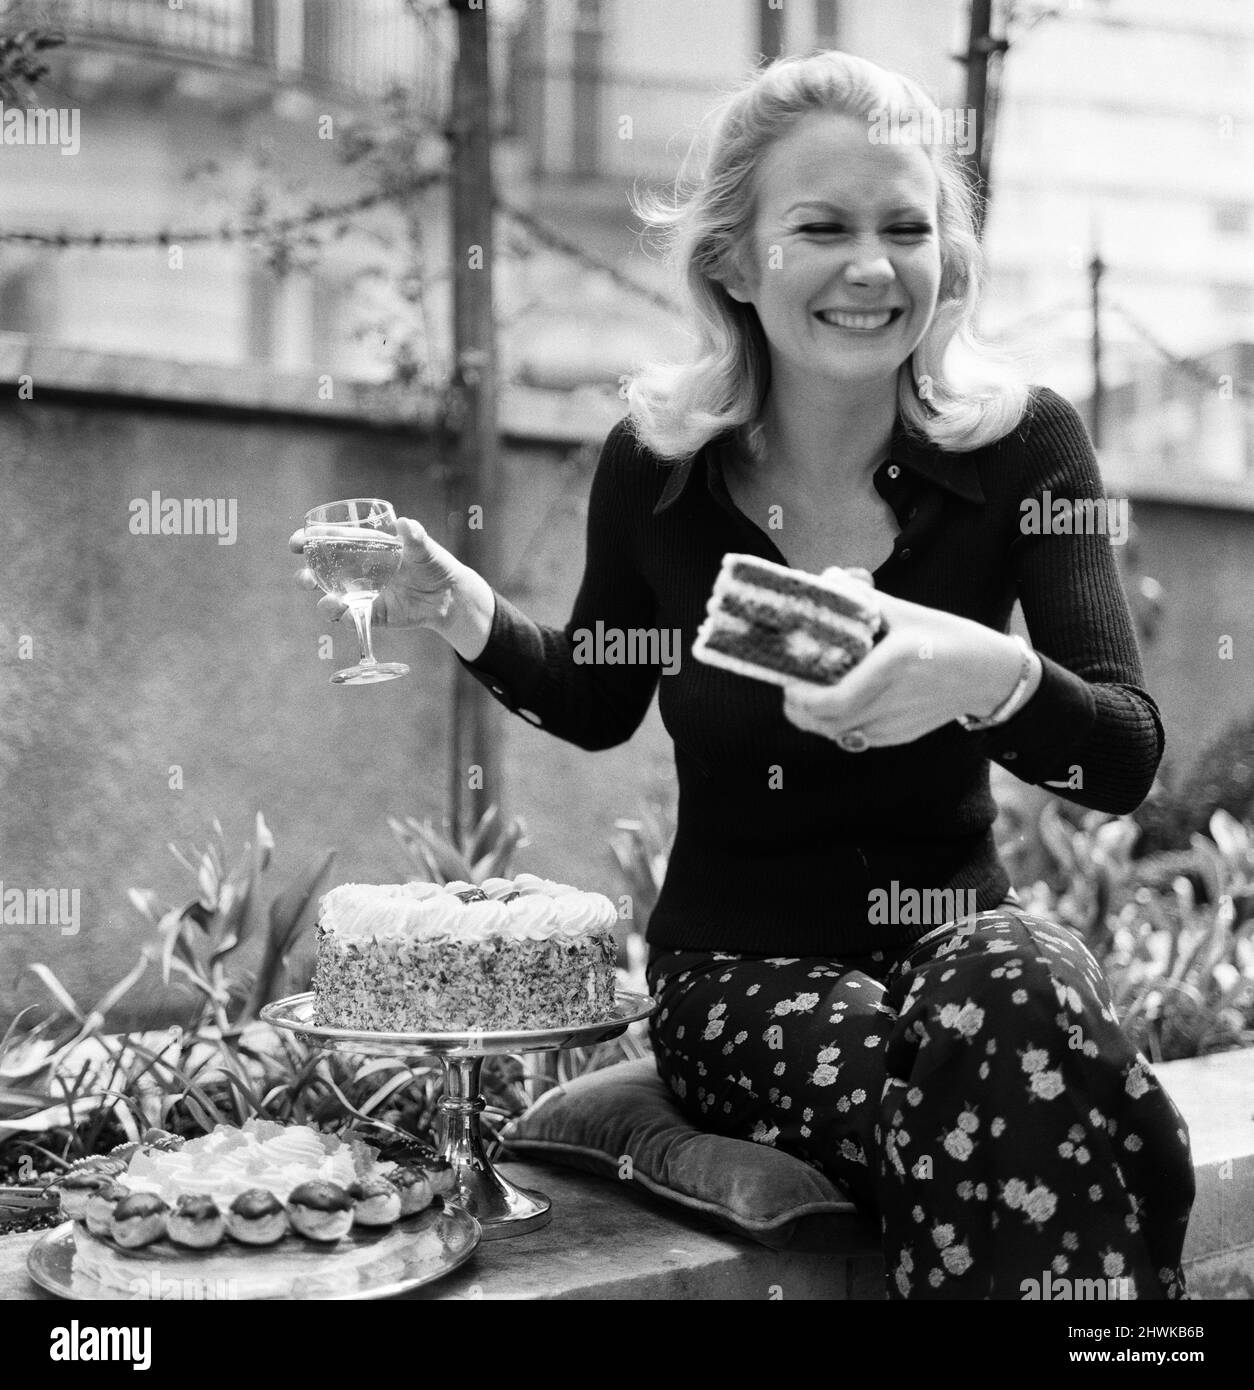 Actress Juliet Mills at the Inn on the Park to promote her new film 'Avanti!'.  Juliet demon states how she gained weight for the film. 15th May 1973. Stock Photo